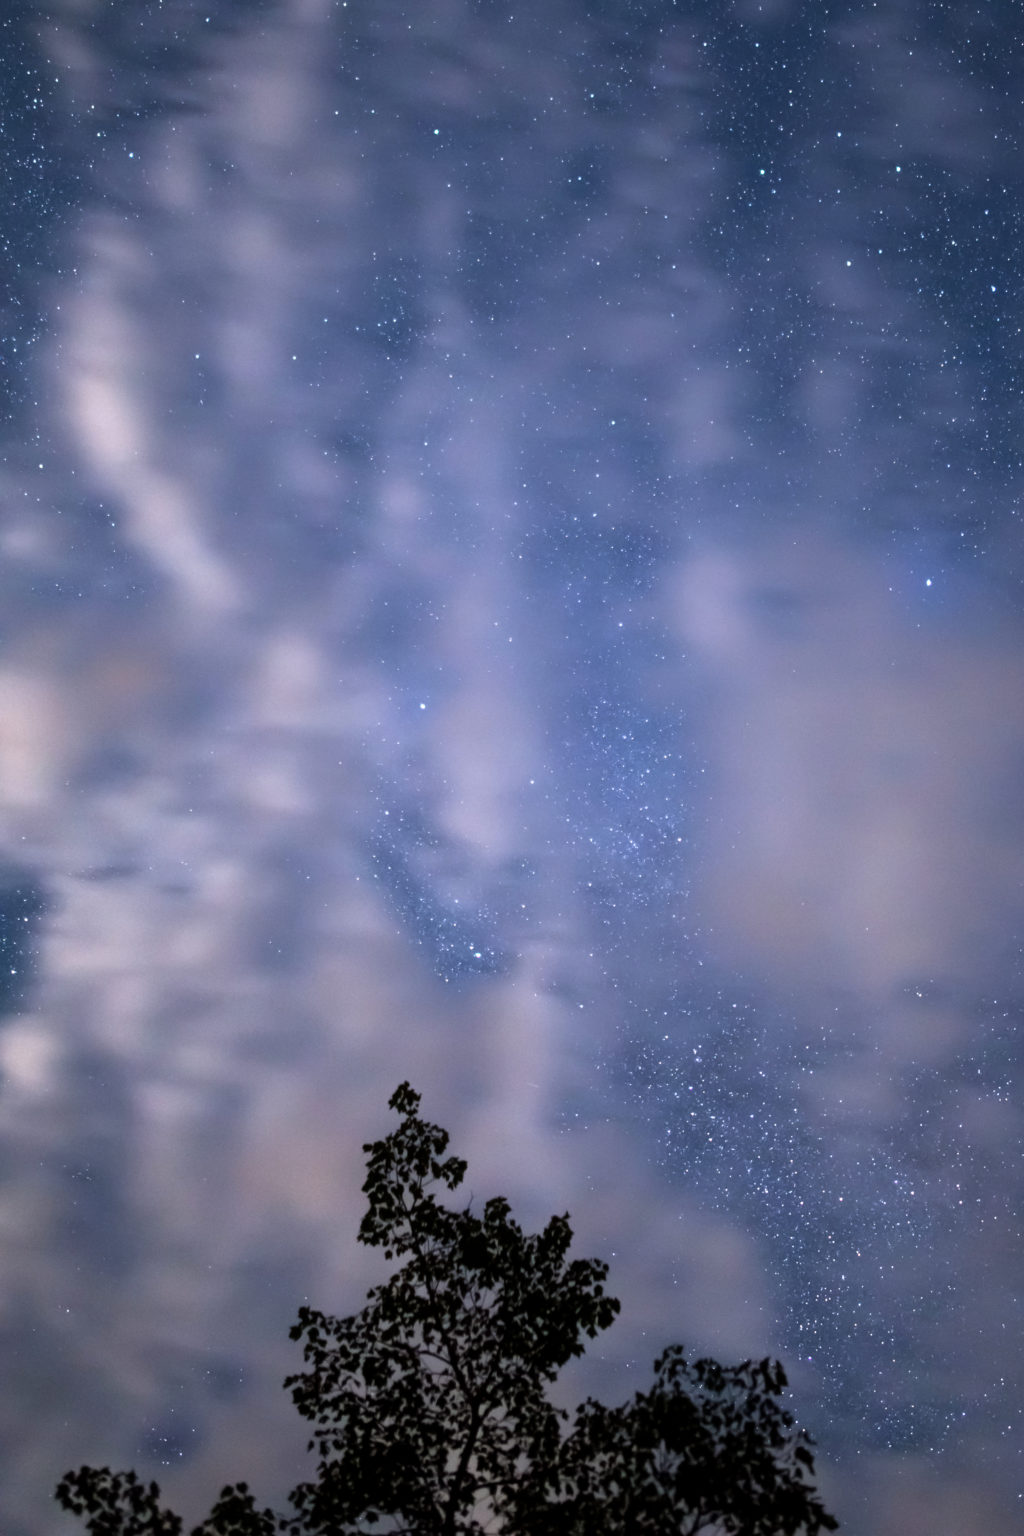 Glimpses of Stars Through Clouds